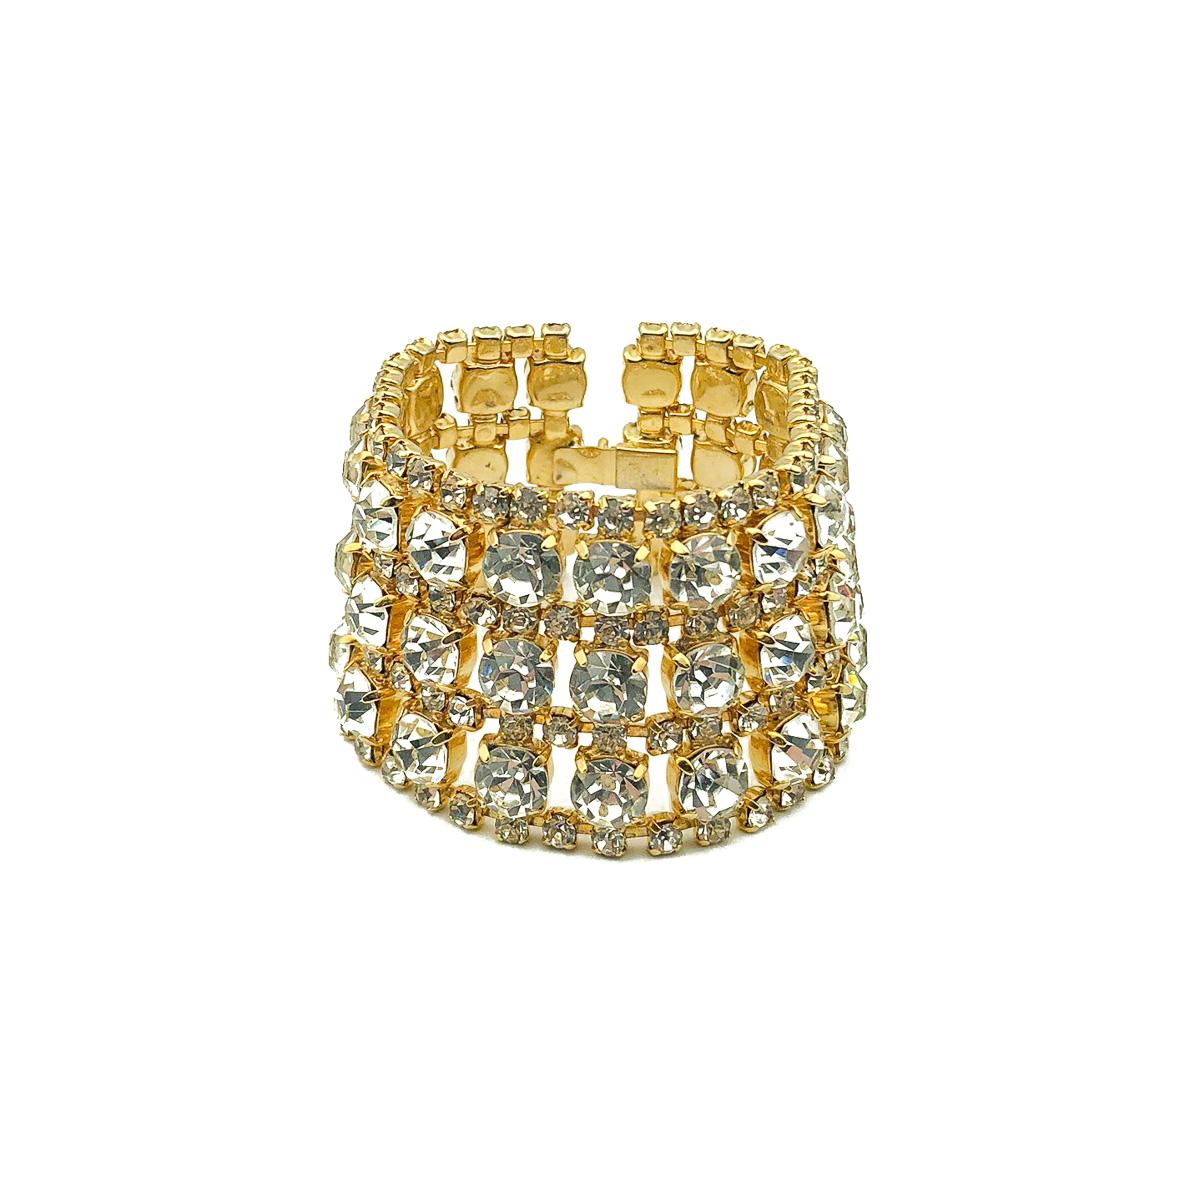 A spectacular, 'full on' glitzy Vintage Gold Rhinestone Cuff. Crafted in gold tone metal set with glass crystals. In very good vintage condition. Approx. 18.5 cms. The perfect piece of arm candy that will transcend the years with ease. 

Established